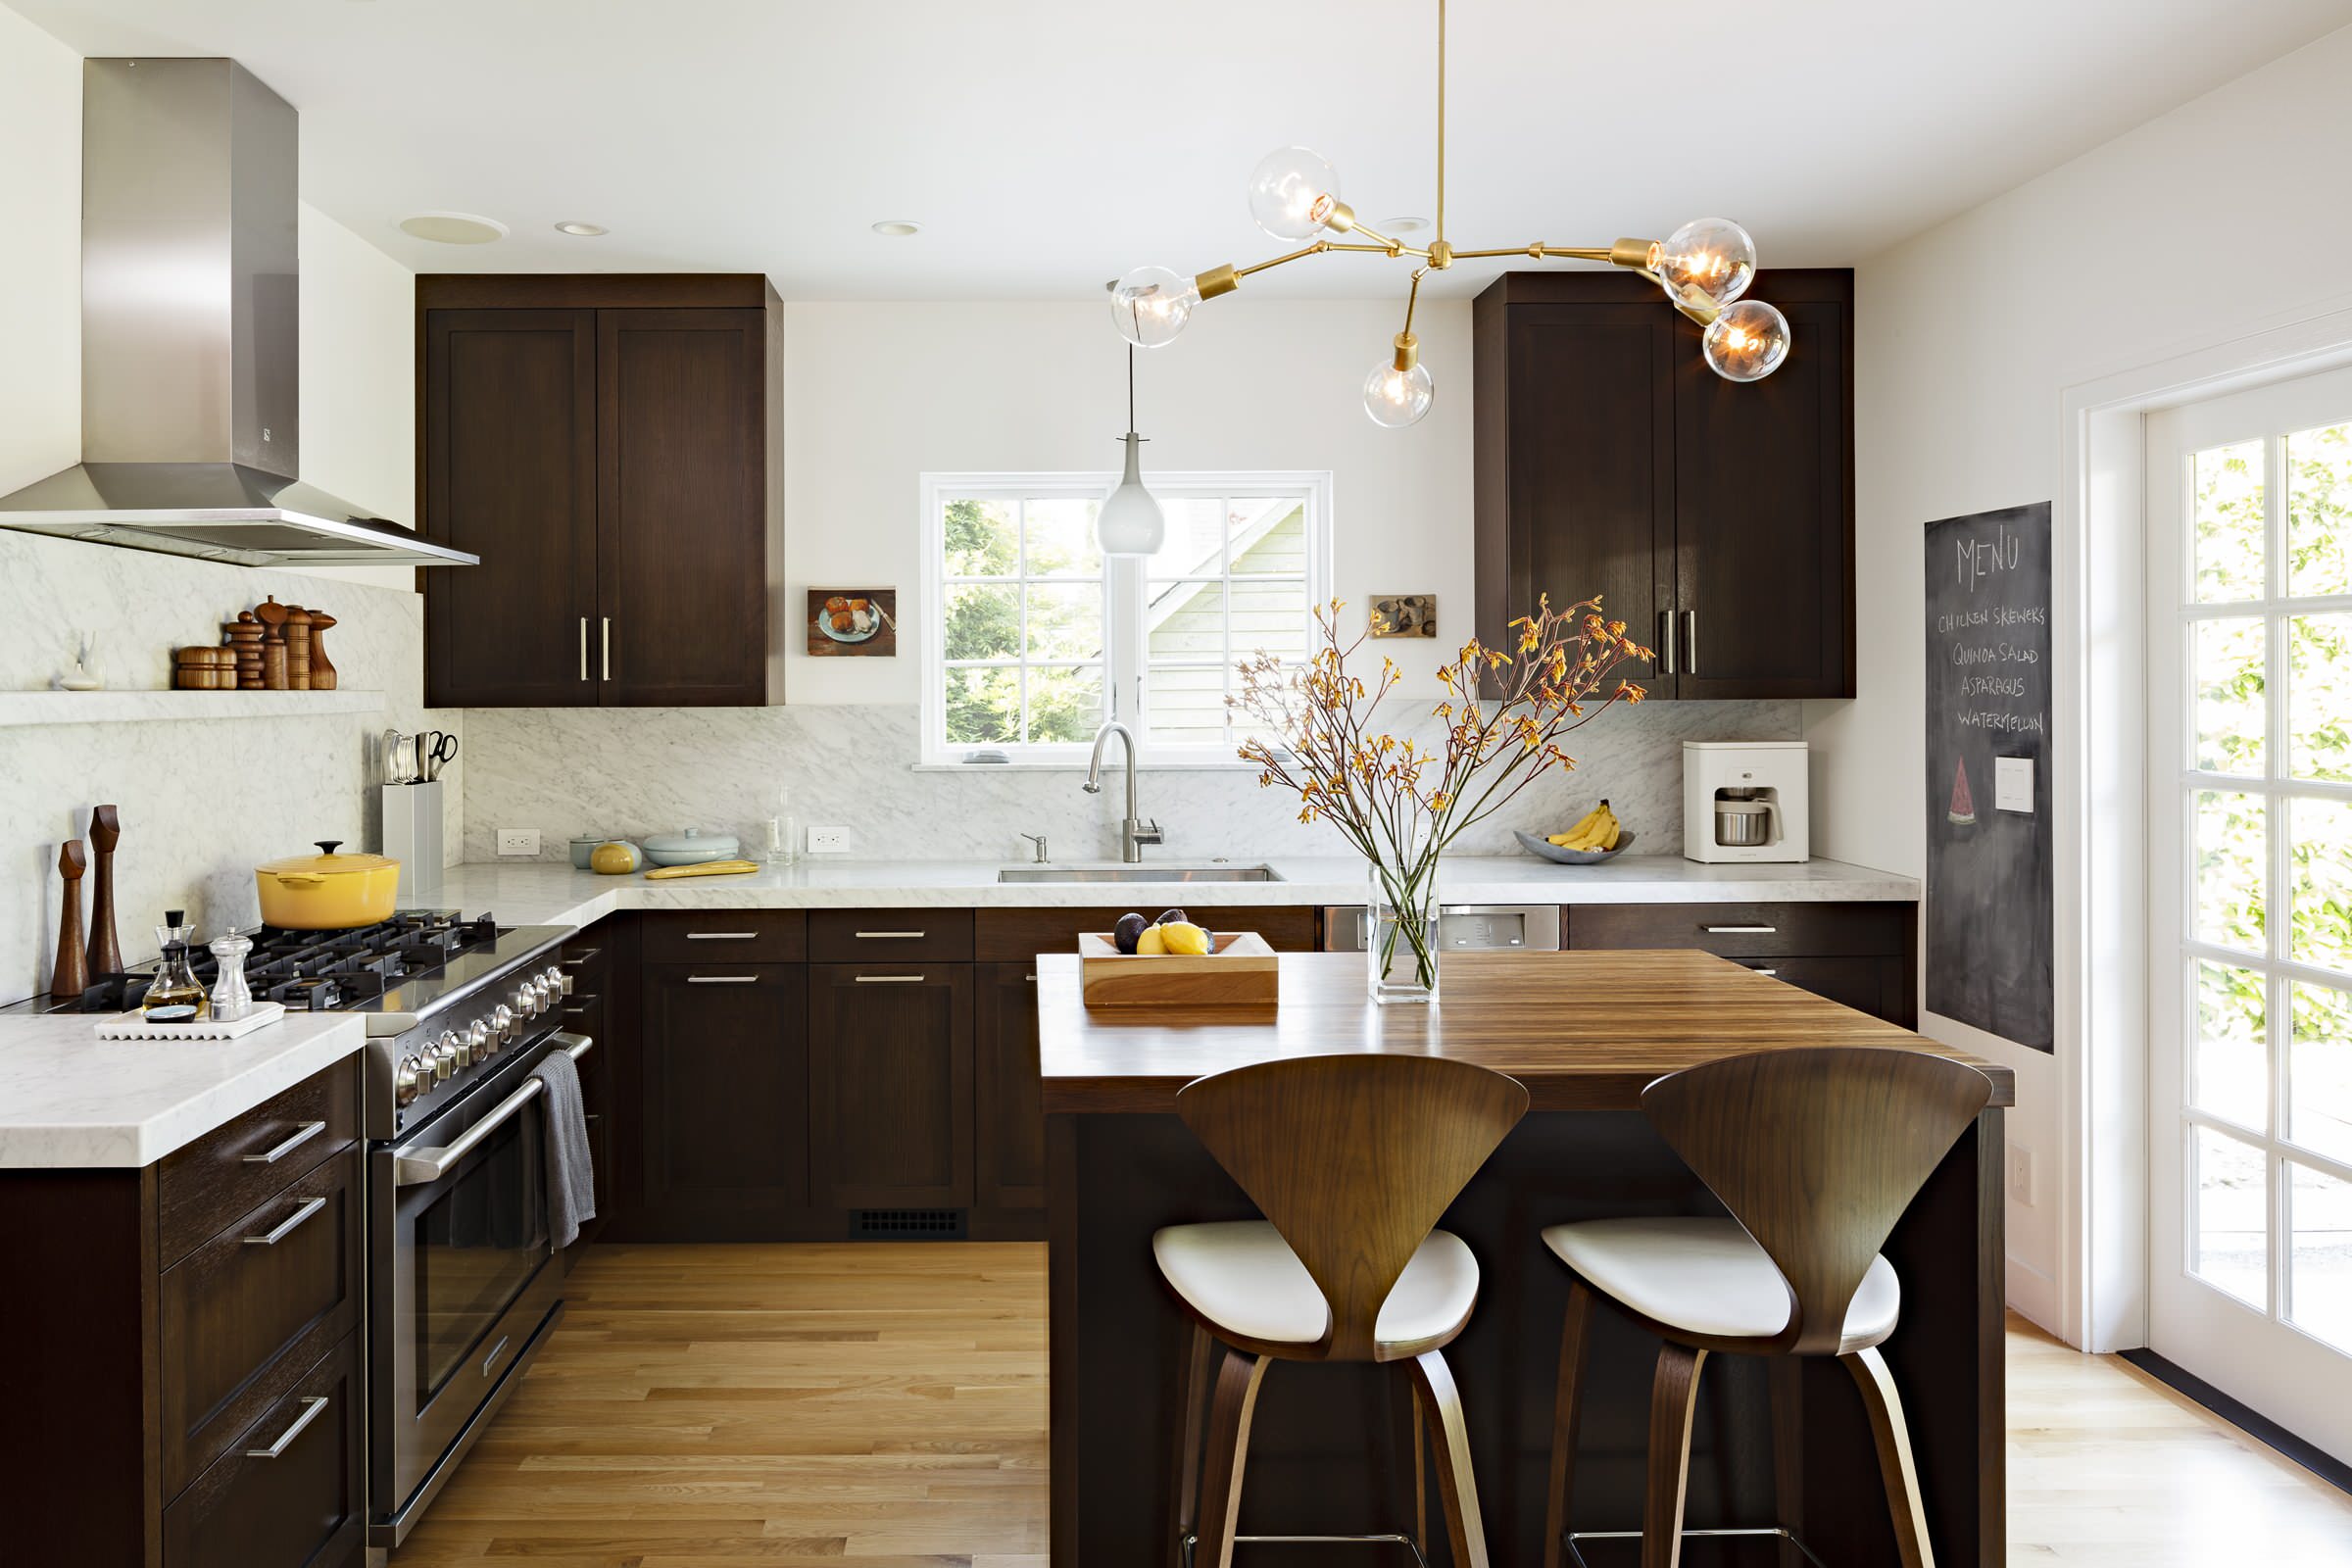 Earthy Brown coloured kitchen